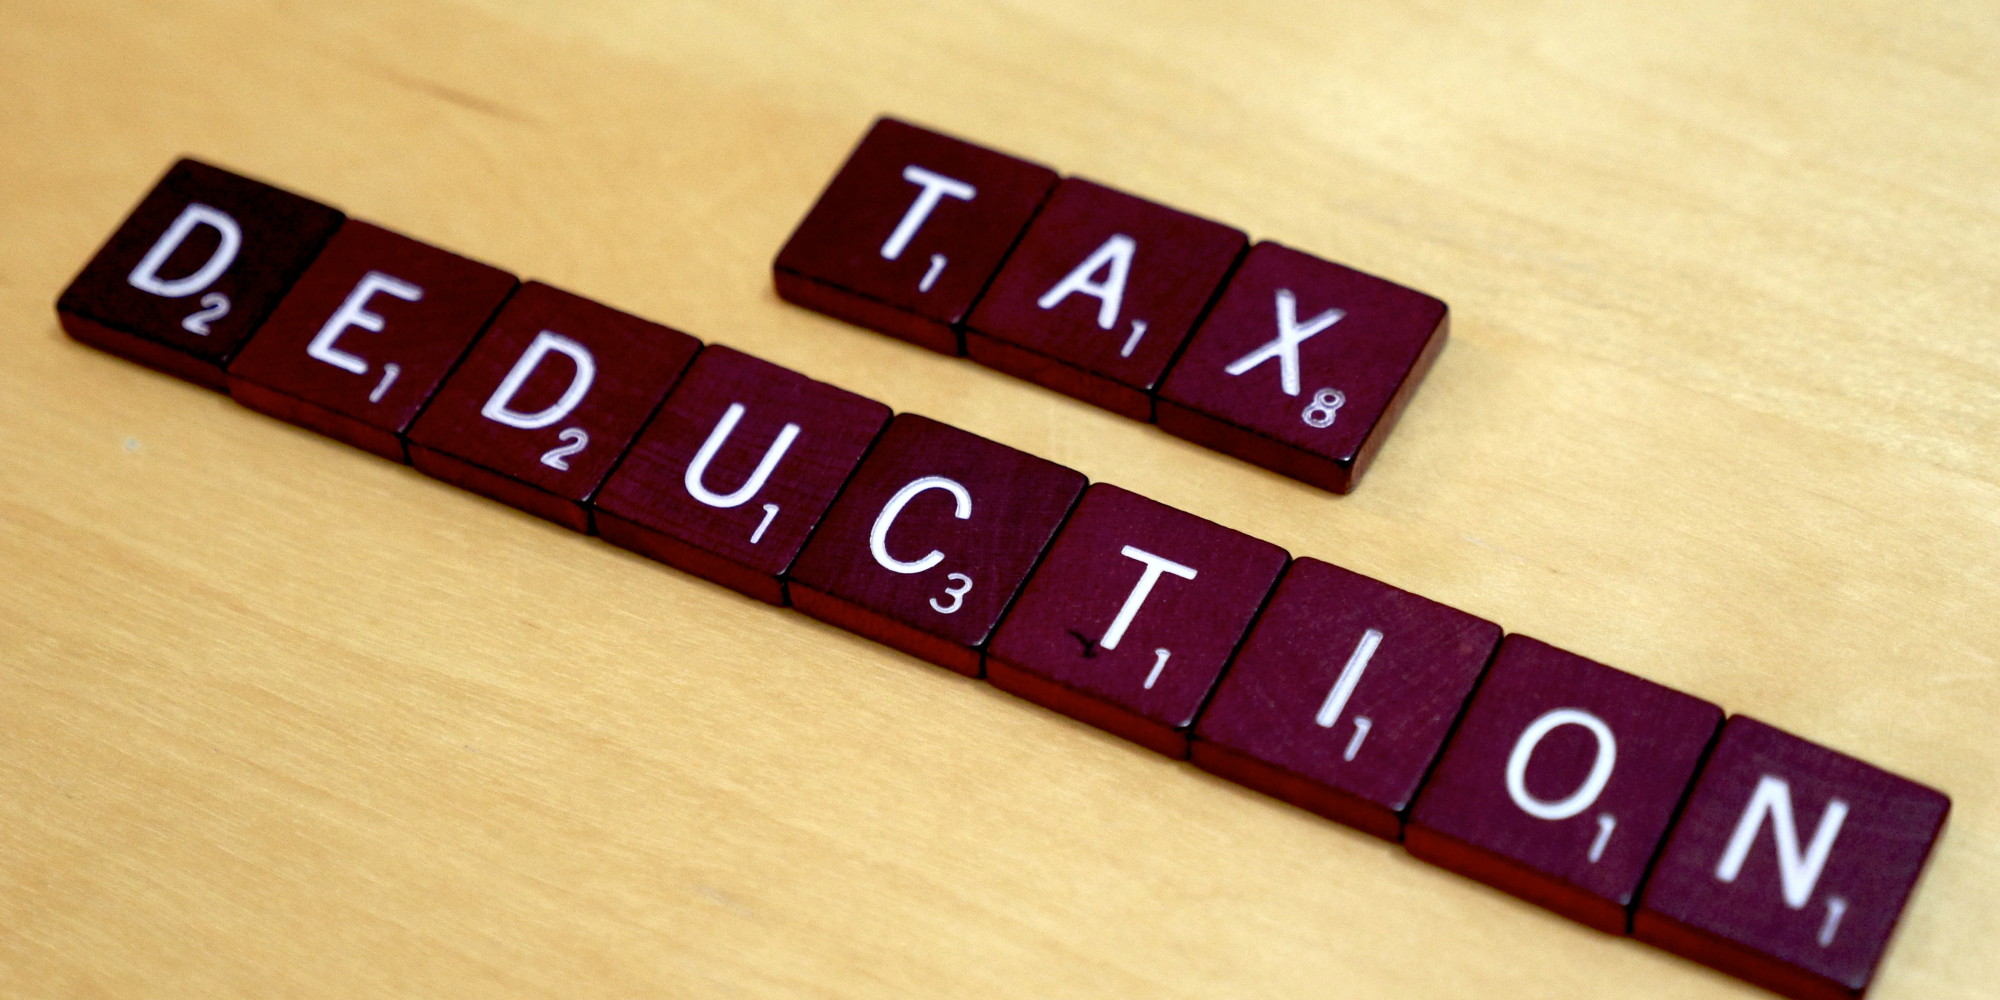 Top 20 things that you can deduct from your taxes